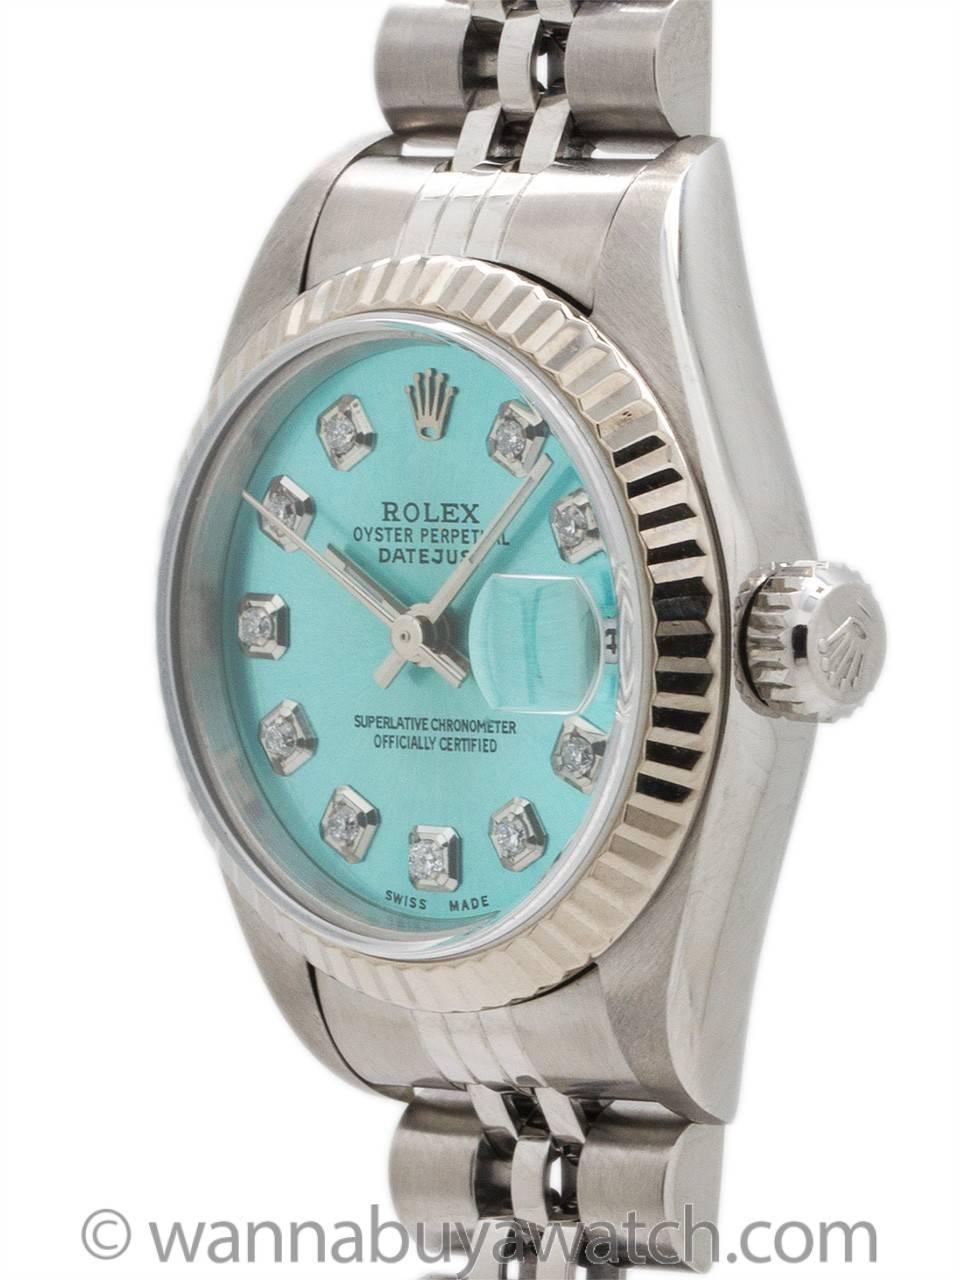 
Lady Rolex Stainless Steel Datejust ref 79174 serial# A2 circa 1998. Featuring a 27mm diameter case with fluted bezel, and sapphire crystal. With very popular custom colored “Ice Blue” dial with applied diamond indexes & silver baton hands. Powered